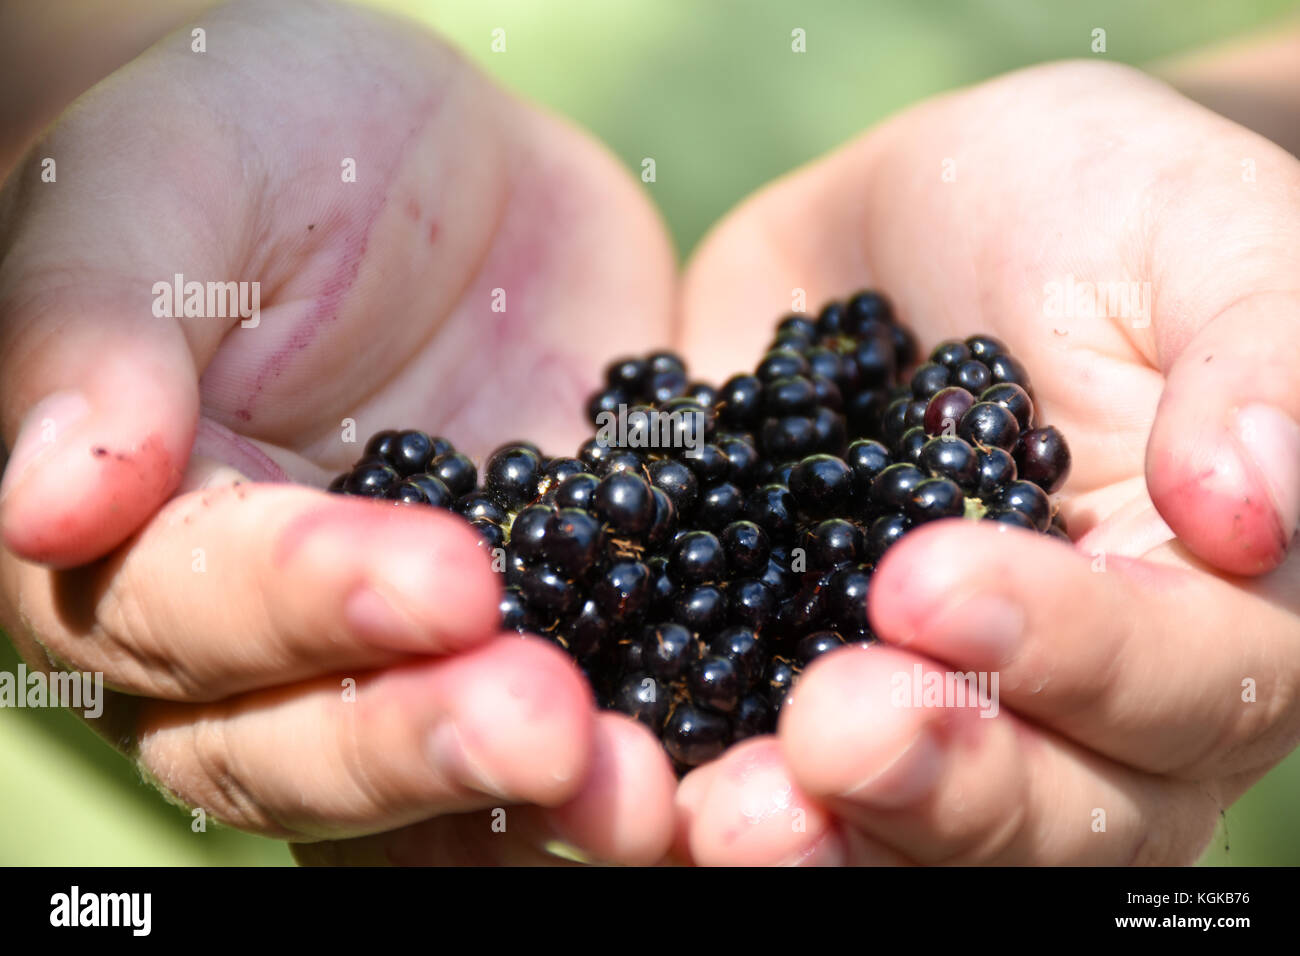 Closeup of a child's hand holding freshly picked blueberries Stock Photo